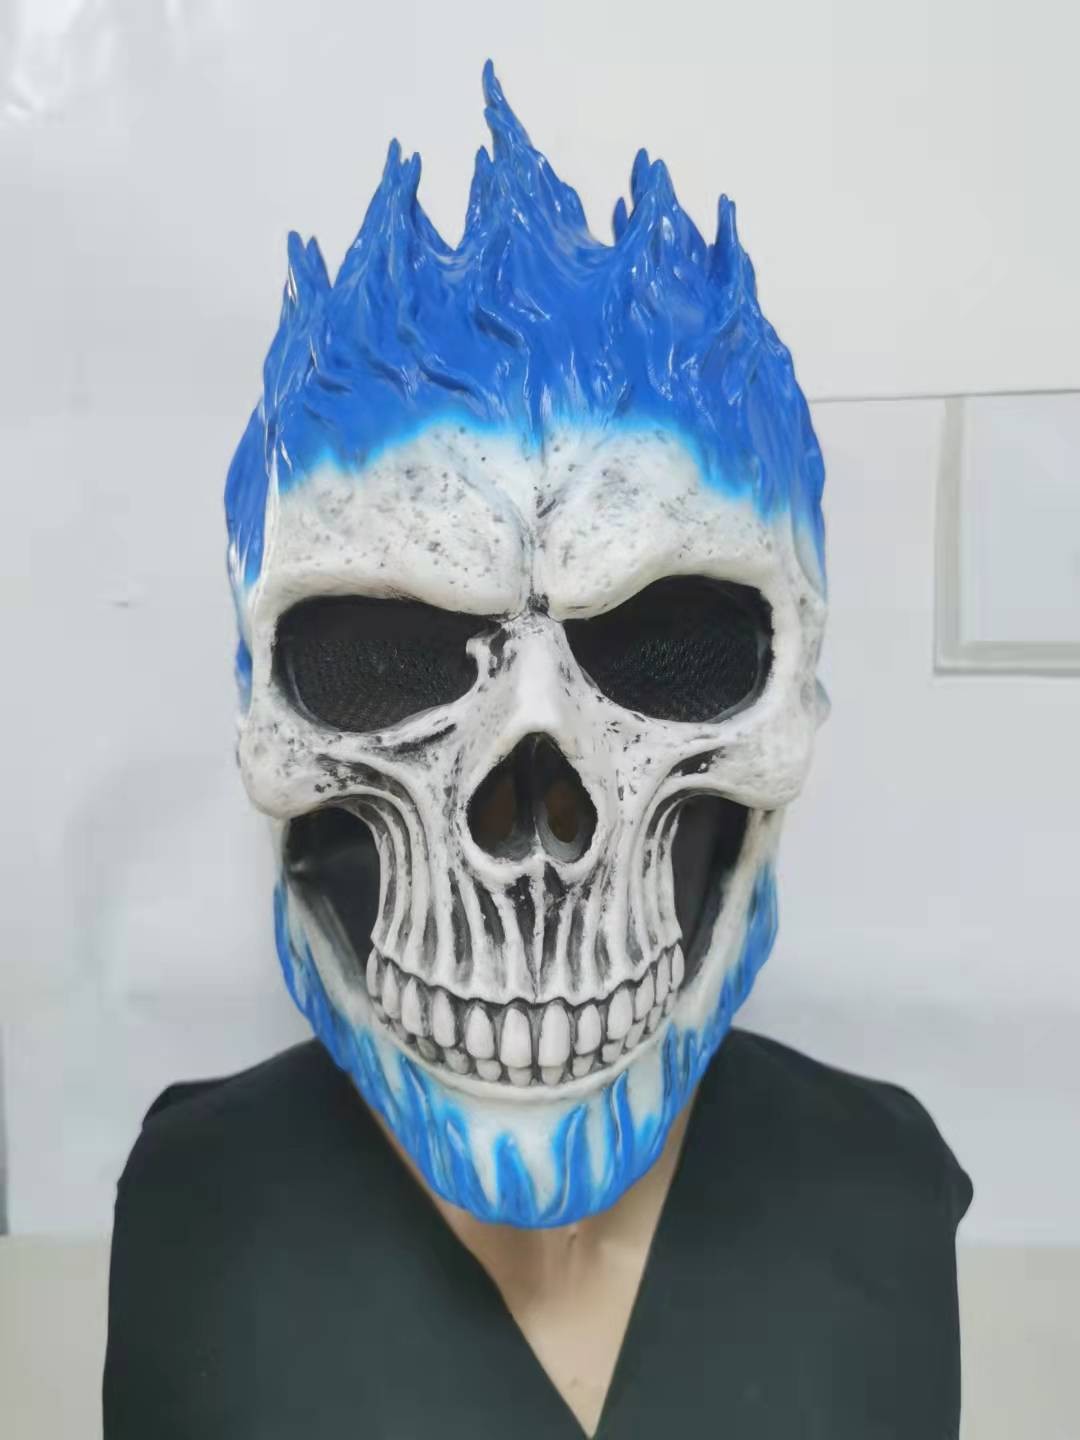 Halloween New Style Ghost Knight Mask Scary Ghost Full Face Mask Skull Latex Head Cover